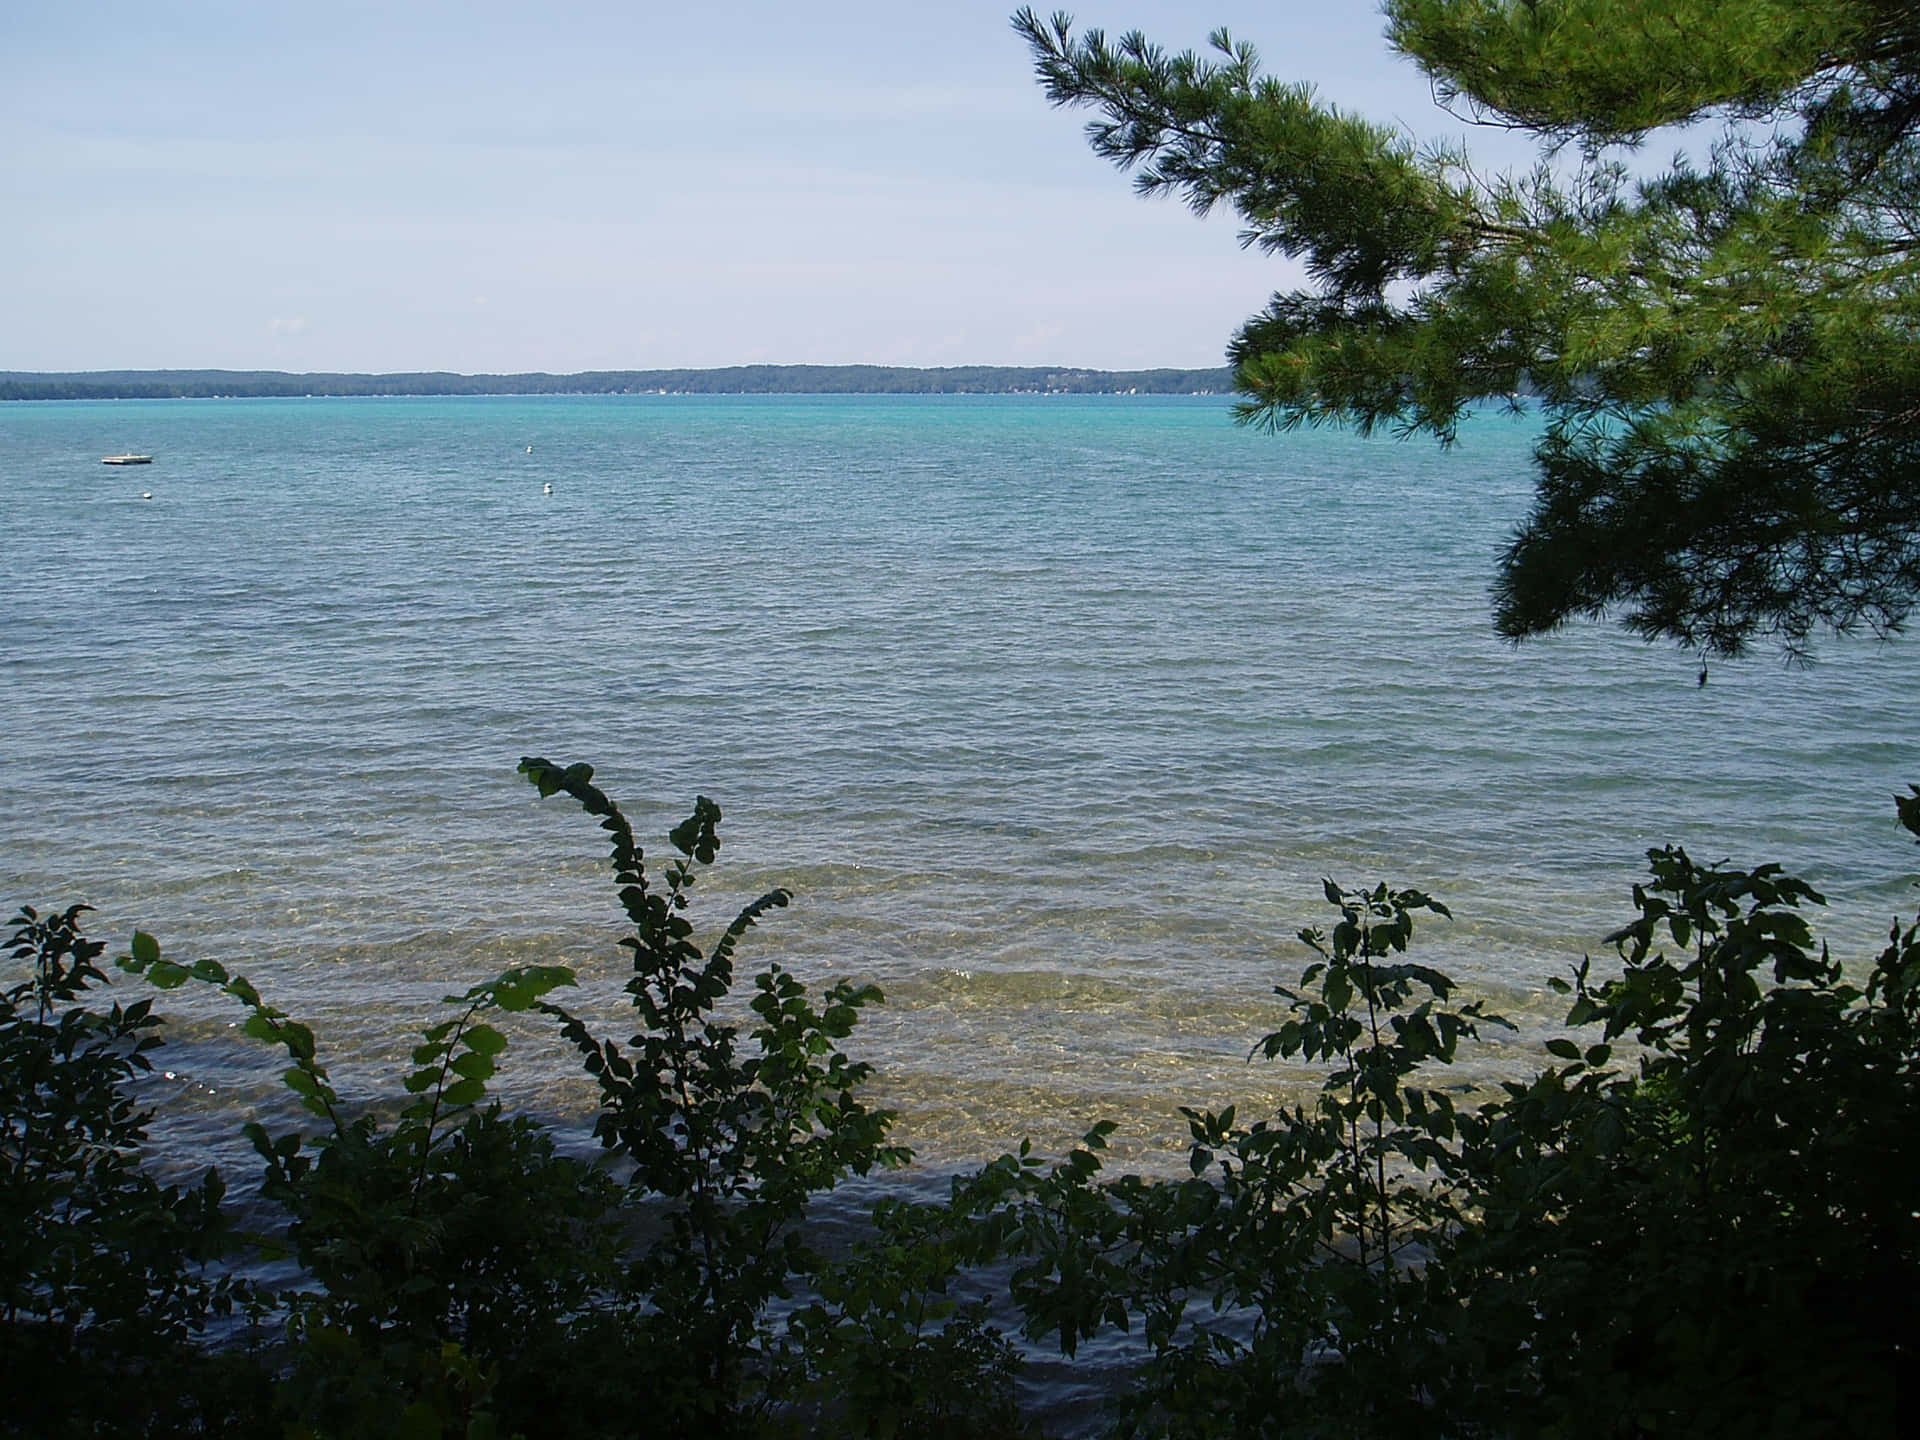 “The breathtaking beauty of Torch Lake”